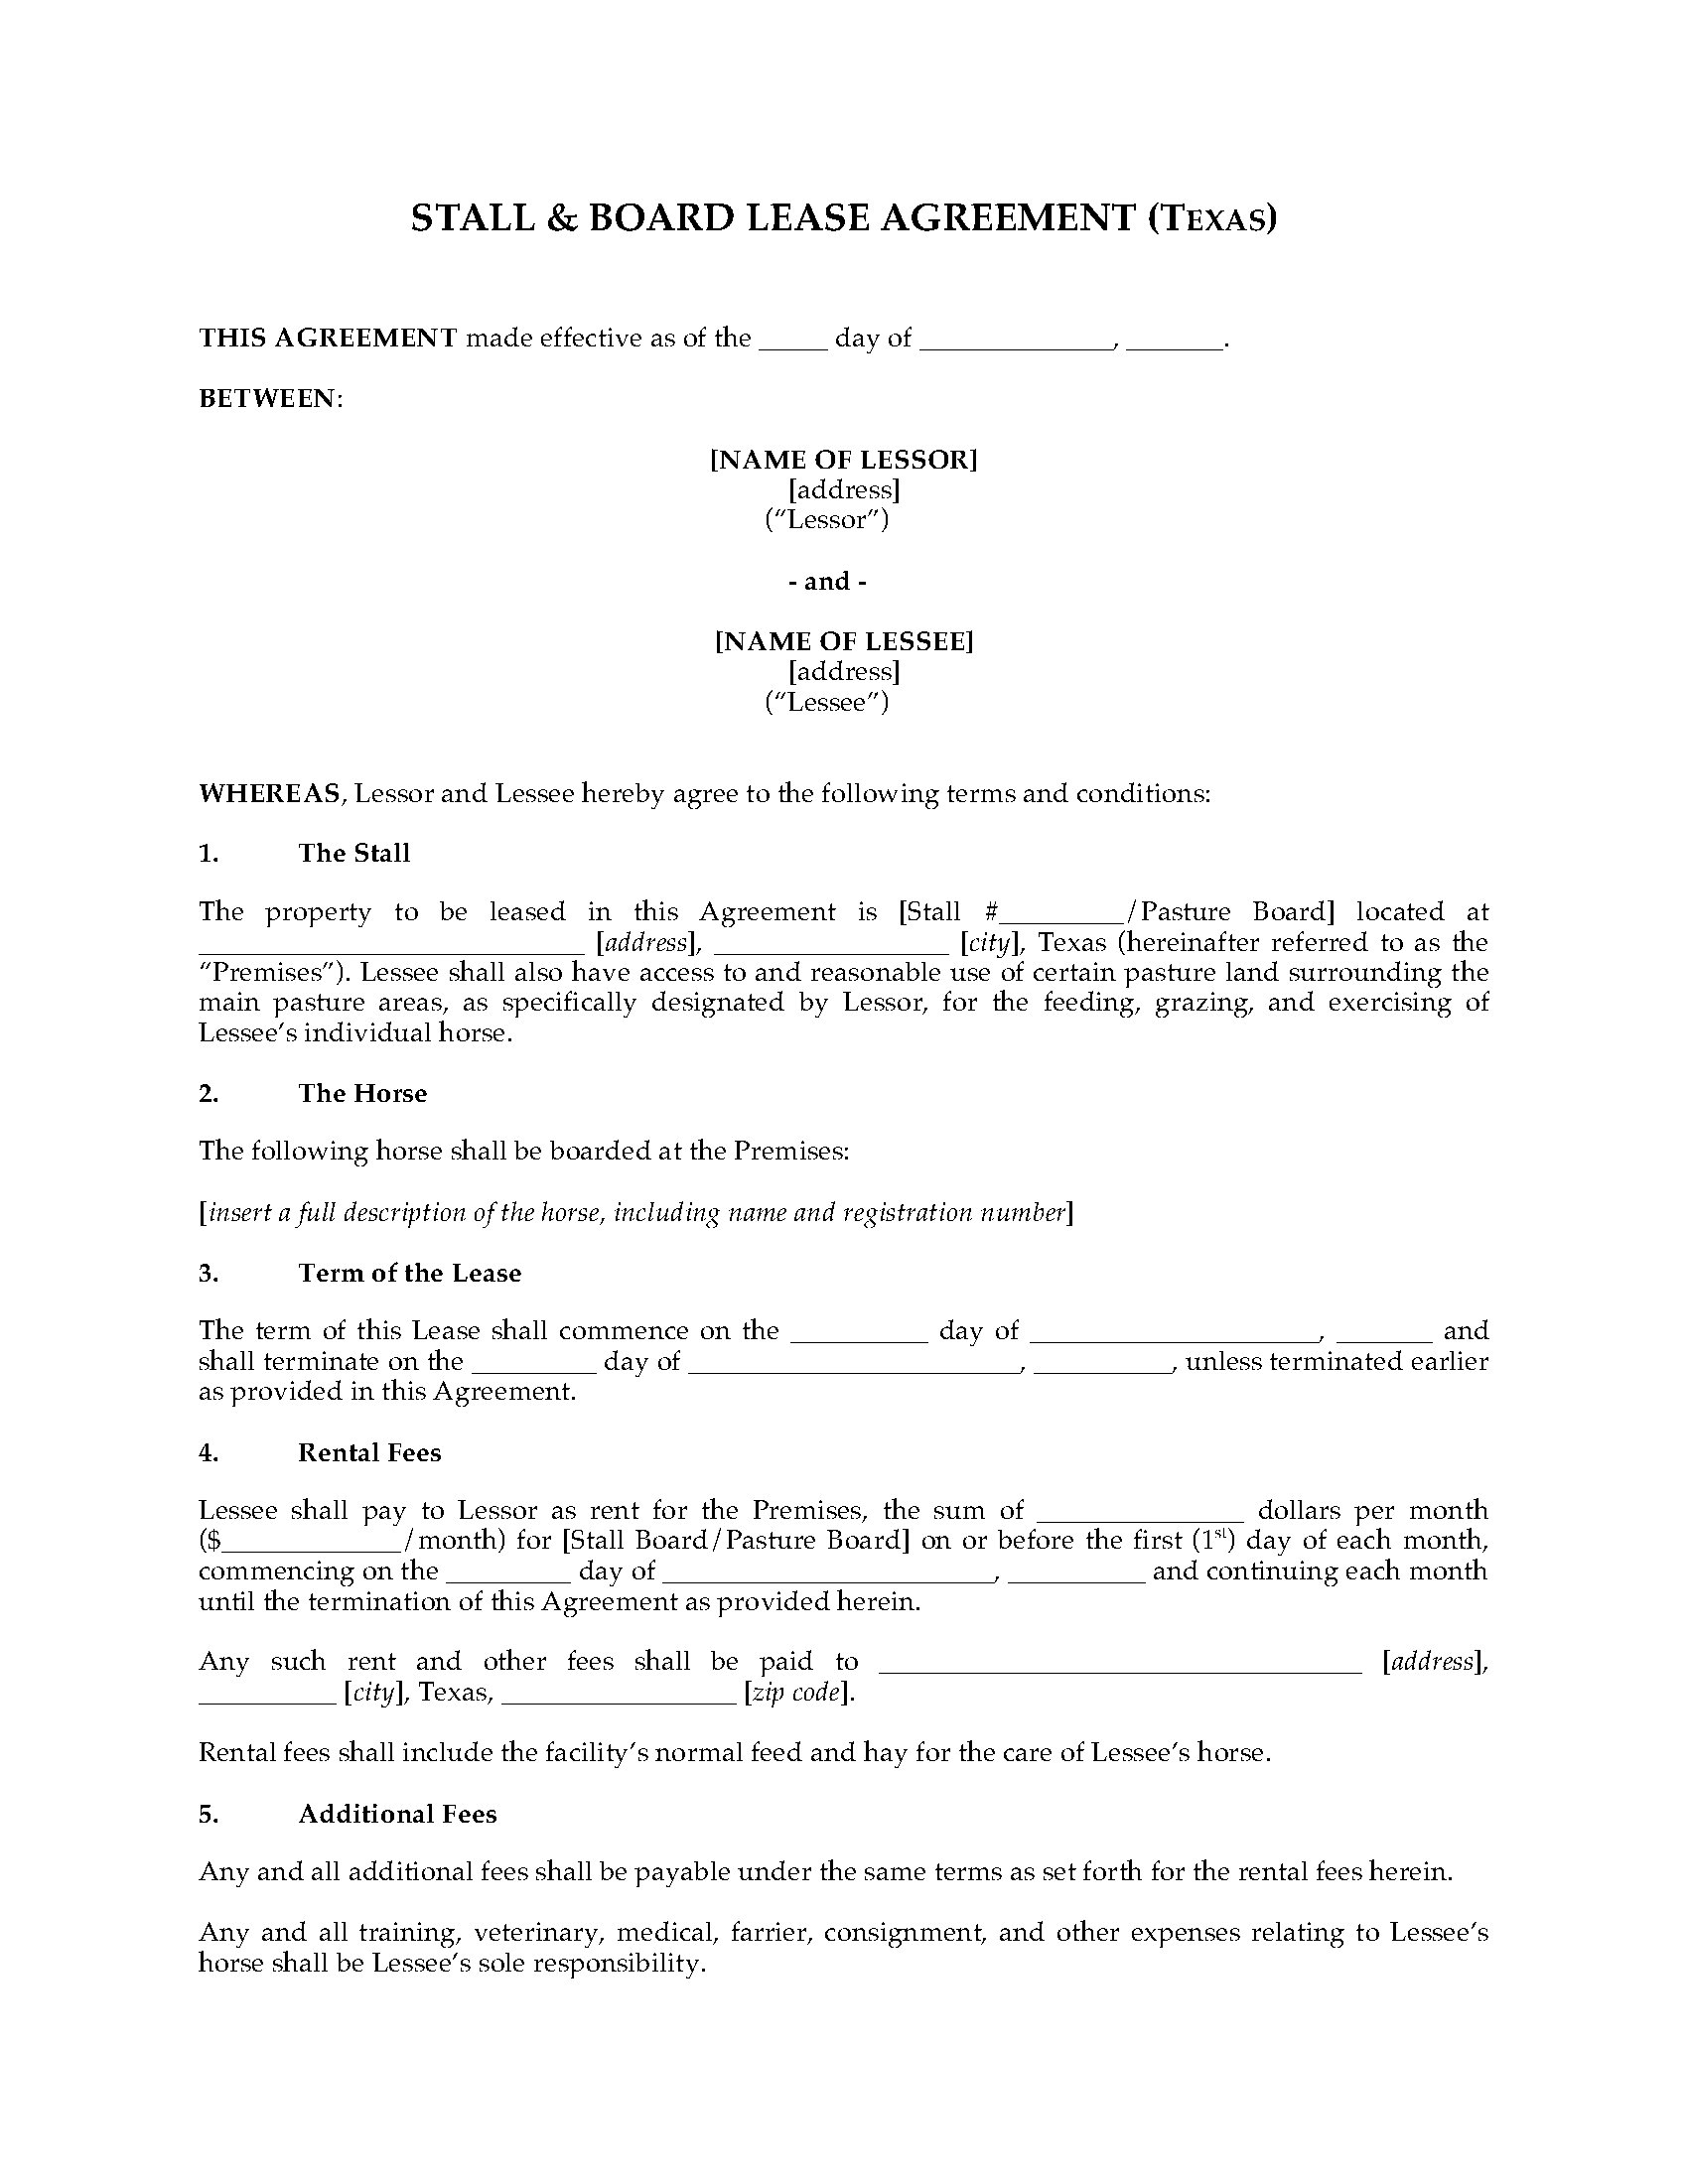 Texas Horse Boarding and Stall Lease Agreement Legal Forms and